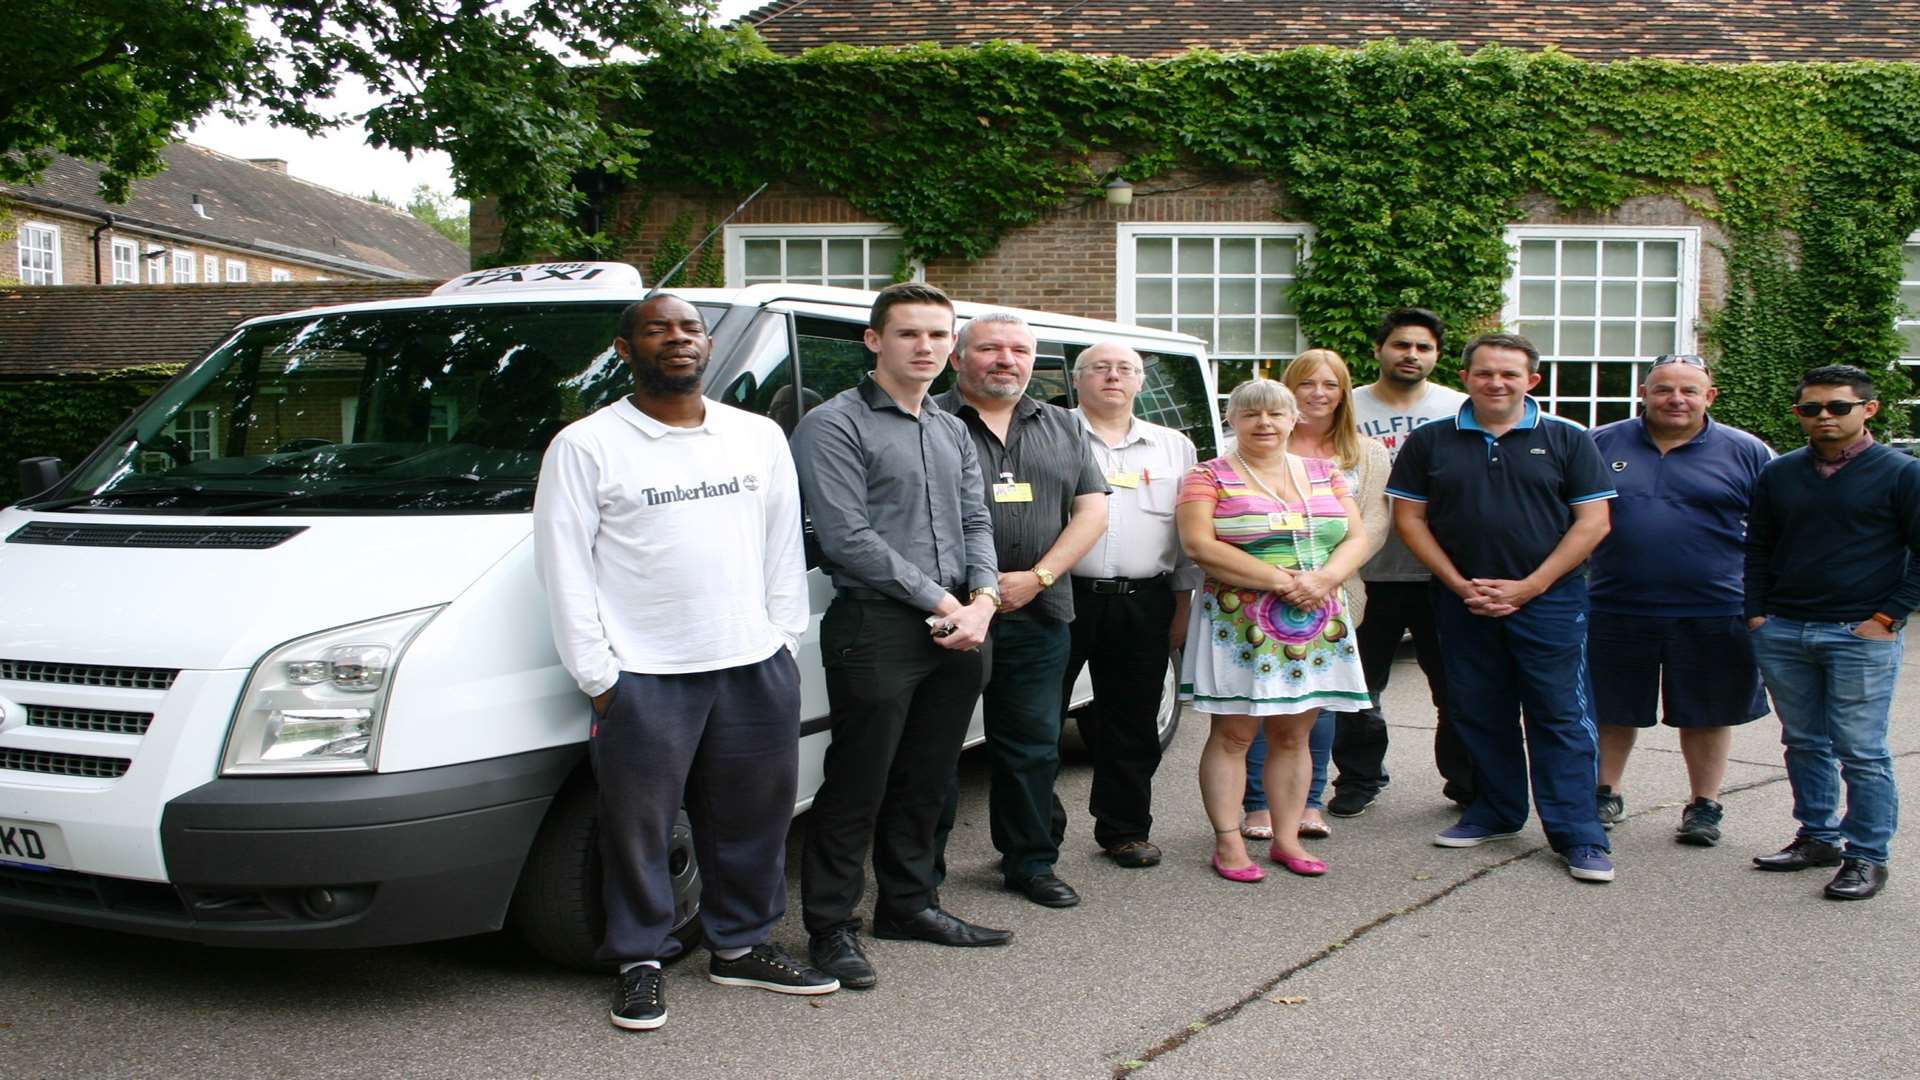 Taxi drivers attending the pilot training session at Tonbridge and Malling Borough Council's offices